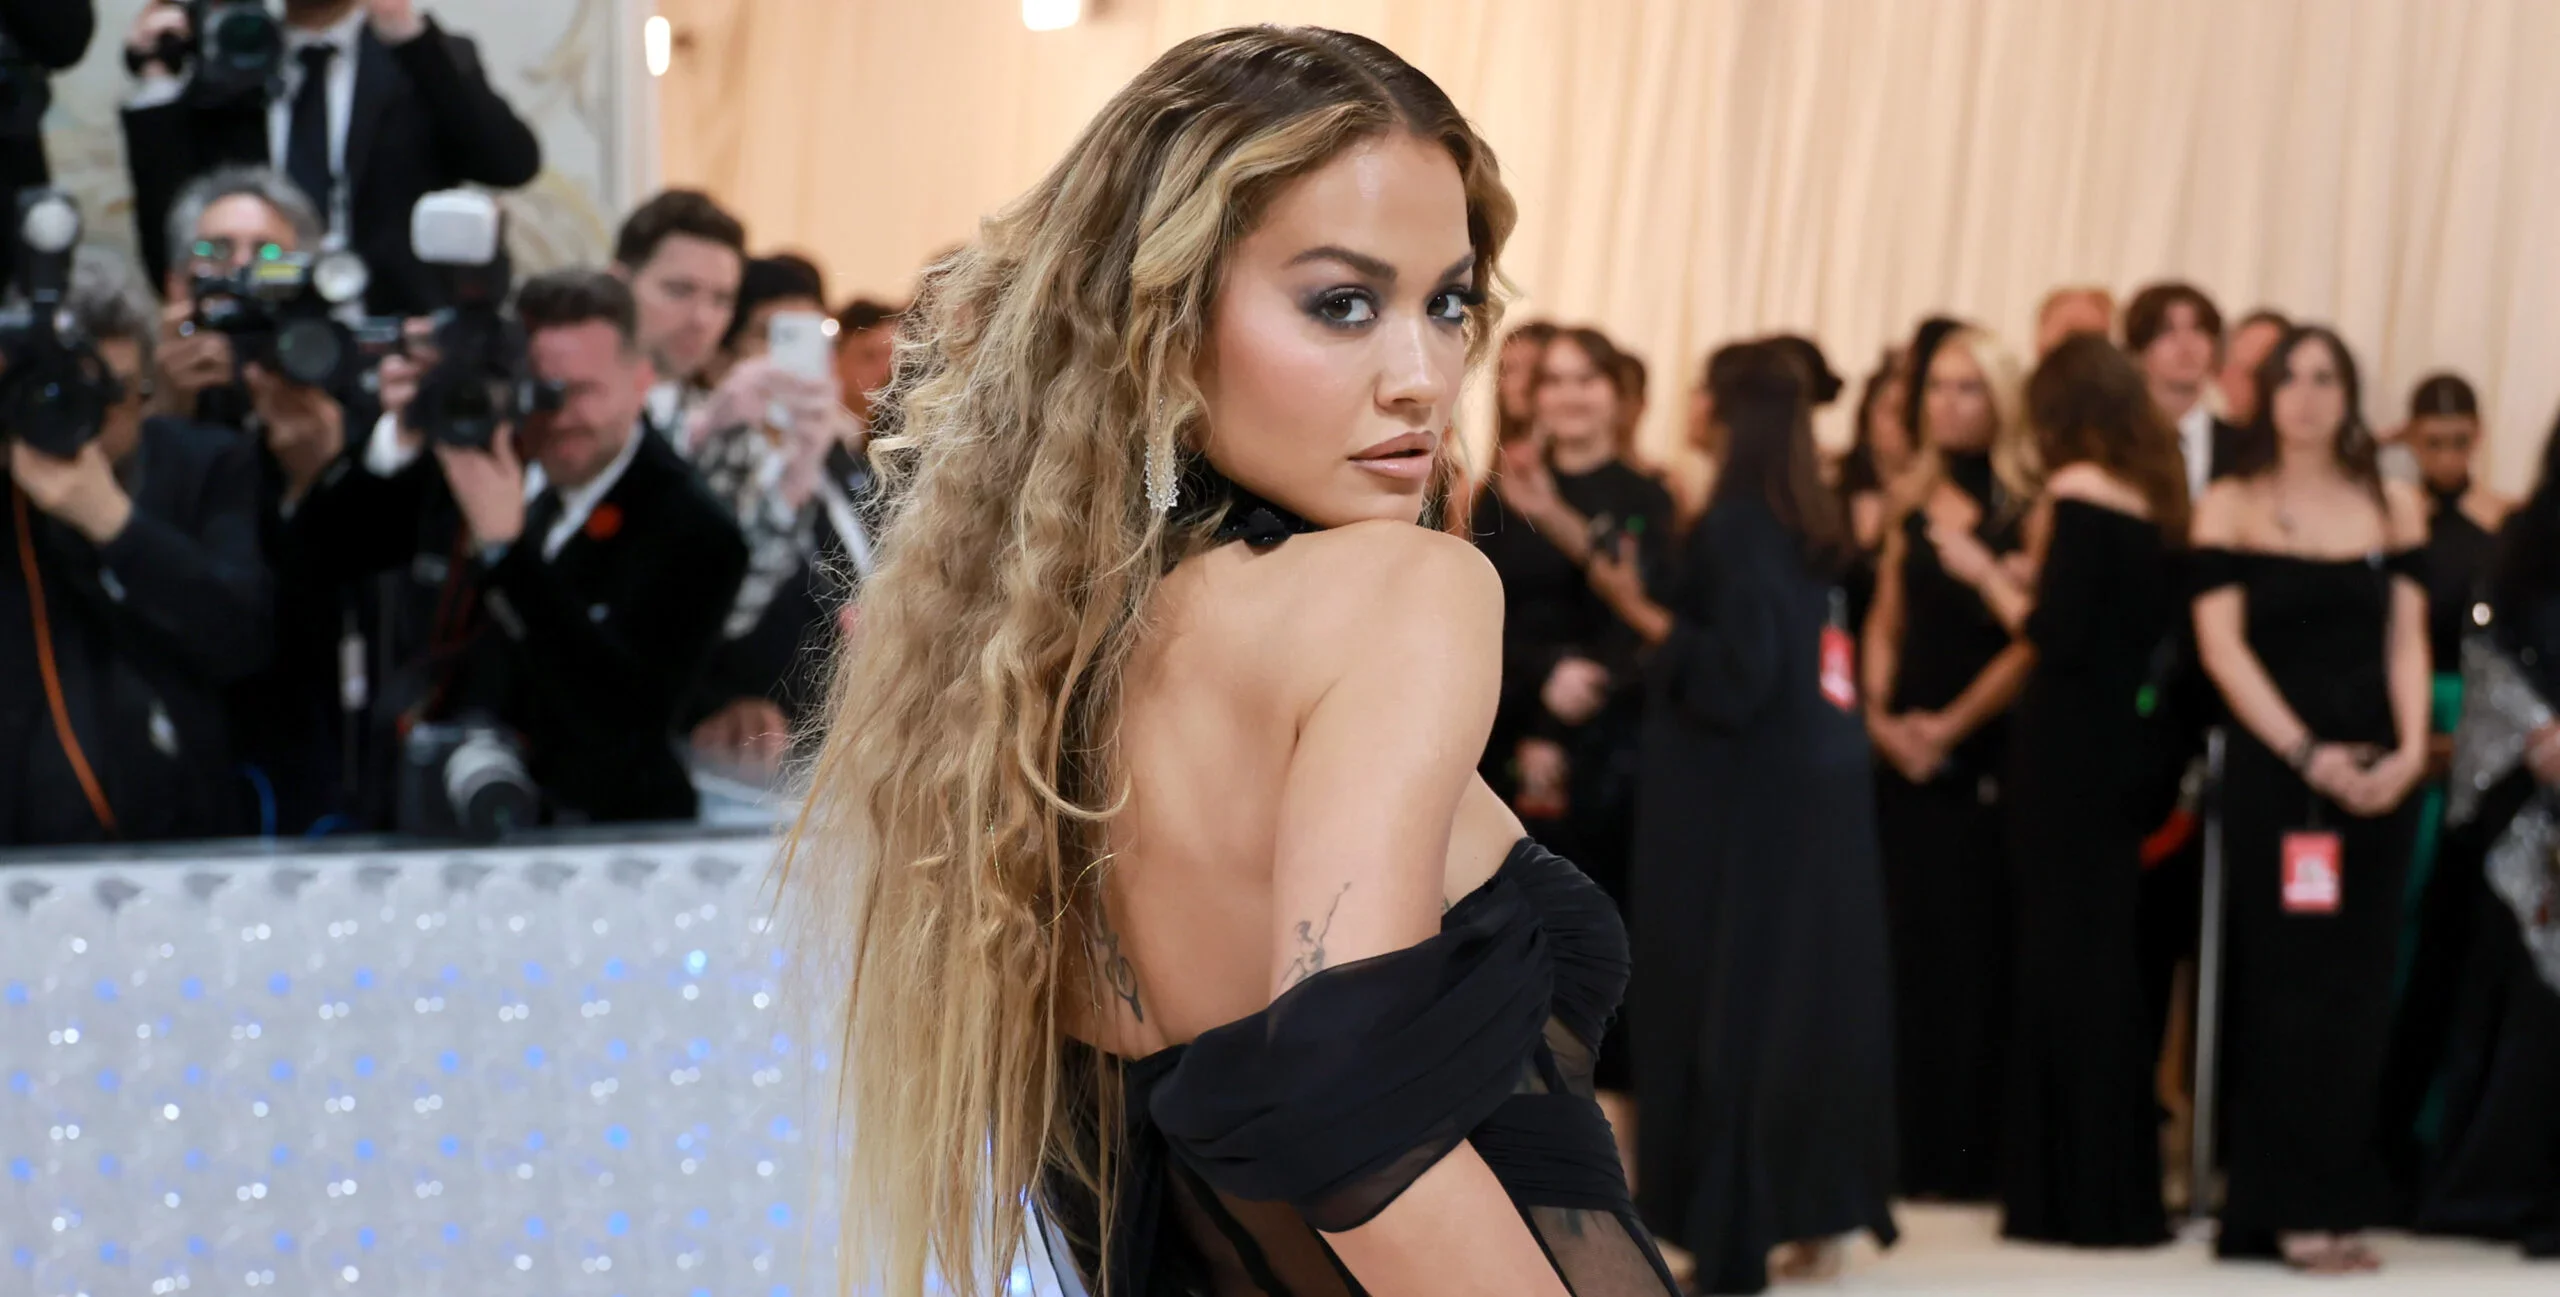 Rita Ora launched Typebea, her new hair care line.